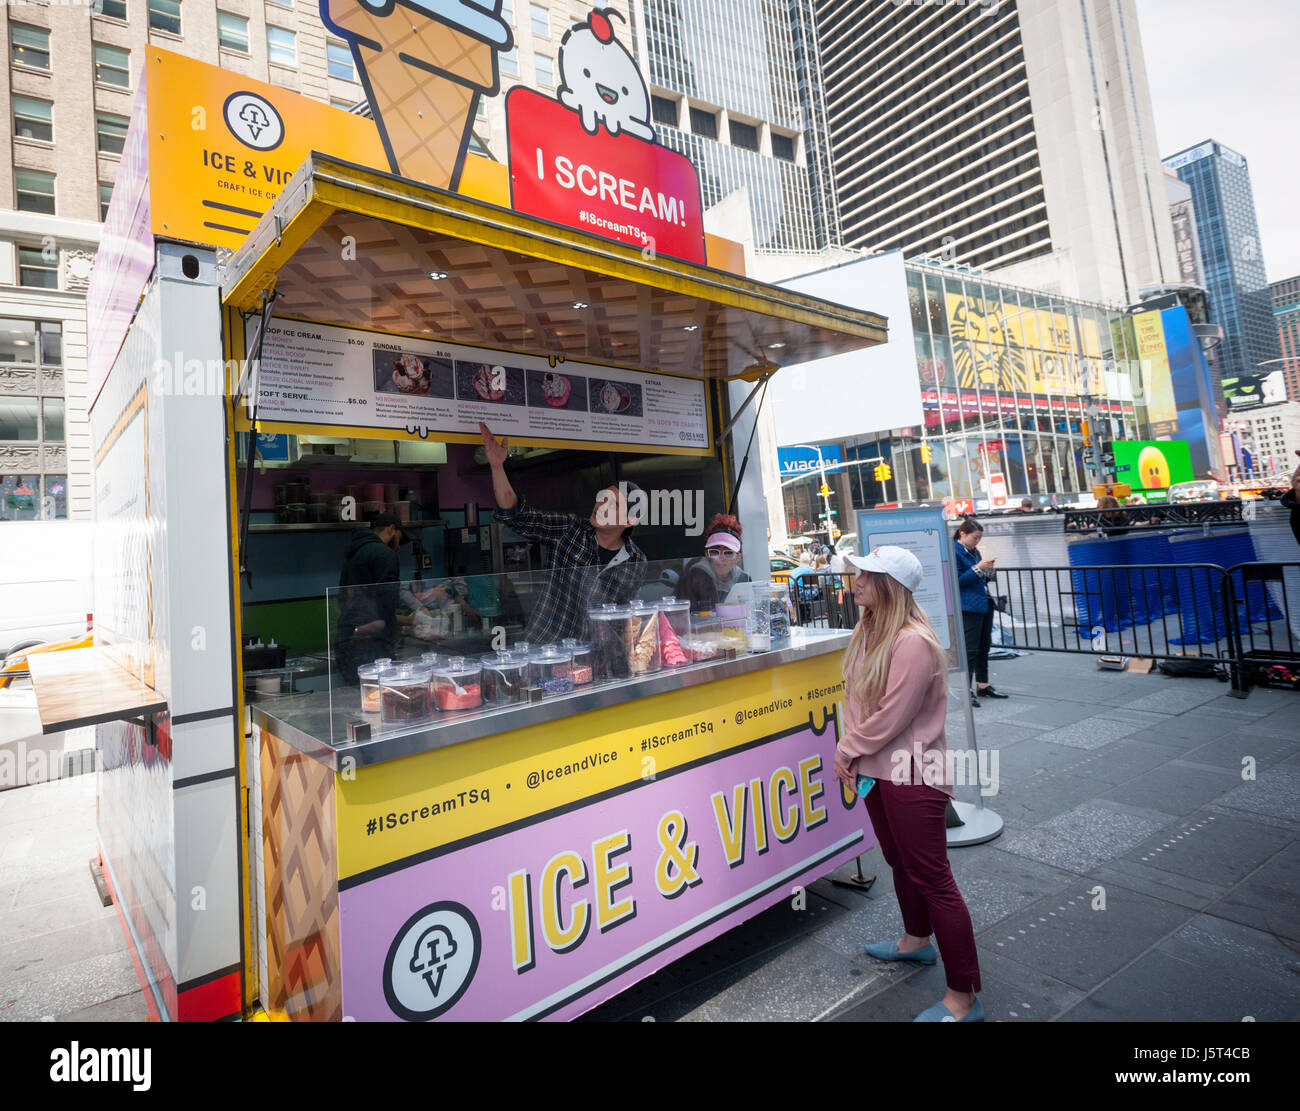 'I Scream', an Ice & Vice pop-up kiosk in Times Square in New York on Tuesday, May 16, 2017. 'I Scream's' menu features politically themed flavors such as Freeze Global Warming and No Mean No with five percent of each purchase going to organizations ACLU, Planned parenthood and the NRDC. The pop-up will be in Times Square through the summer. (© Richard B. Levine) Stock Photo